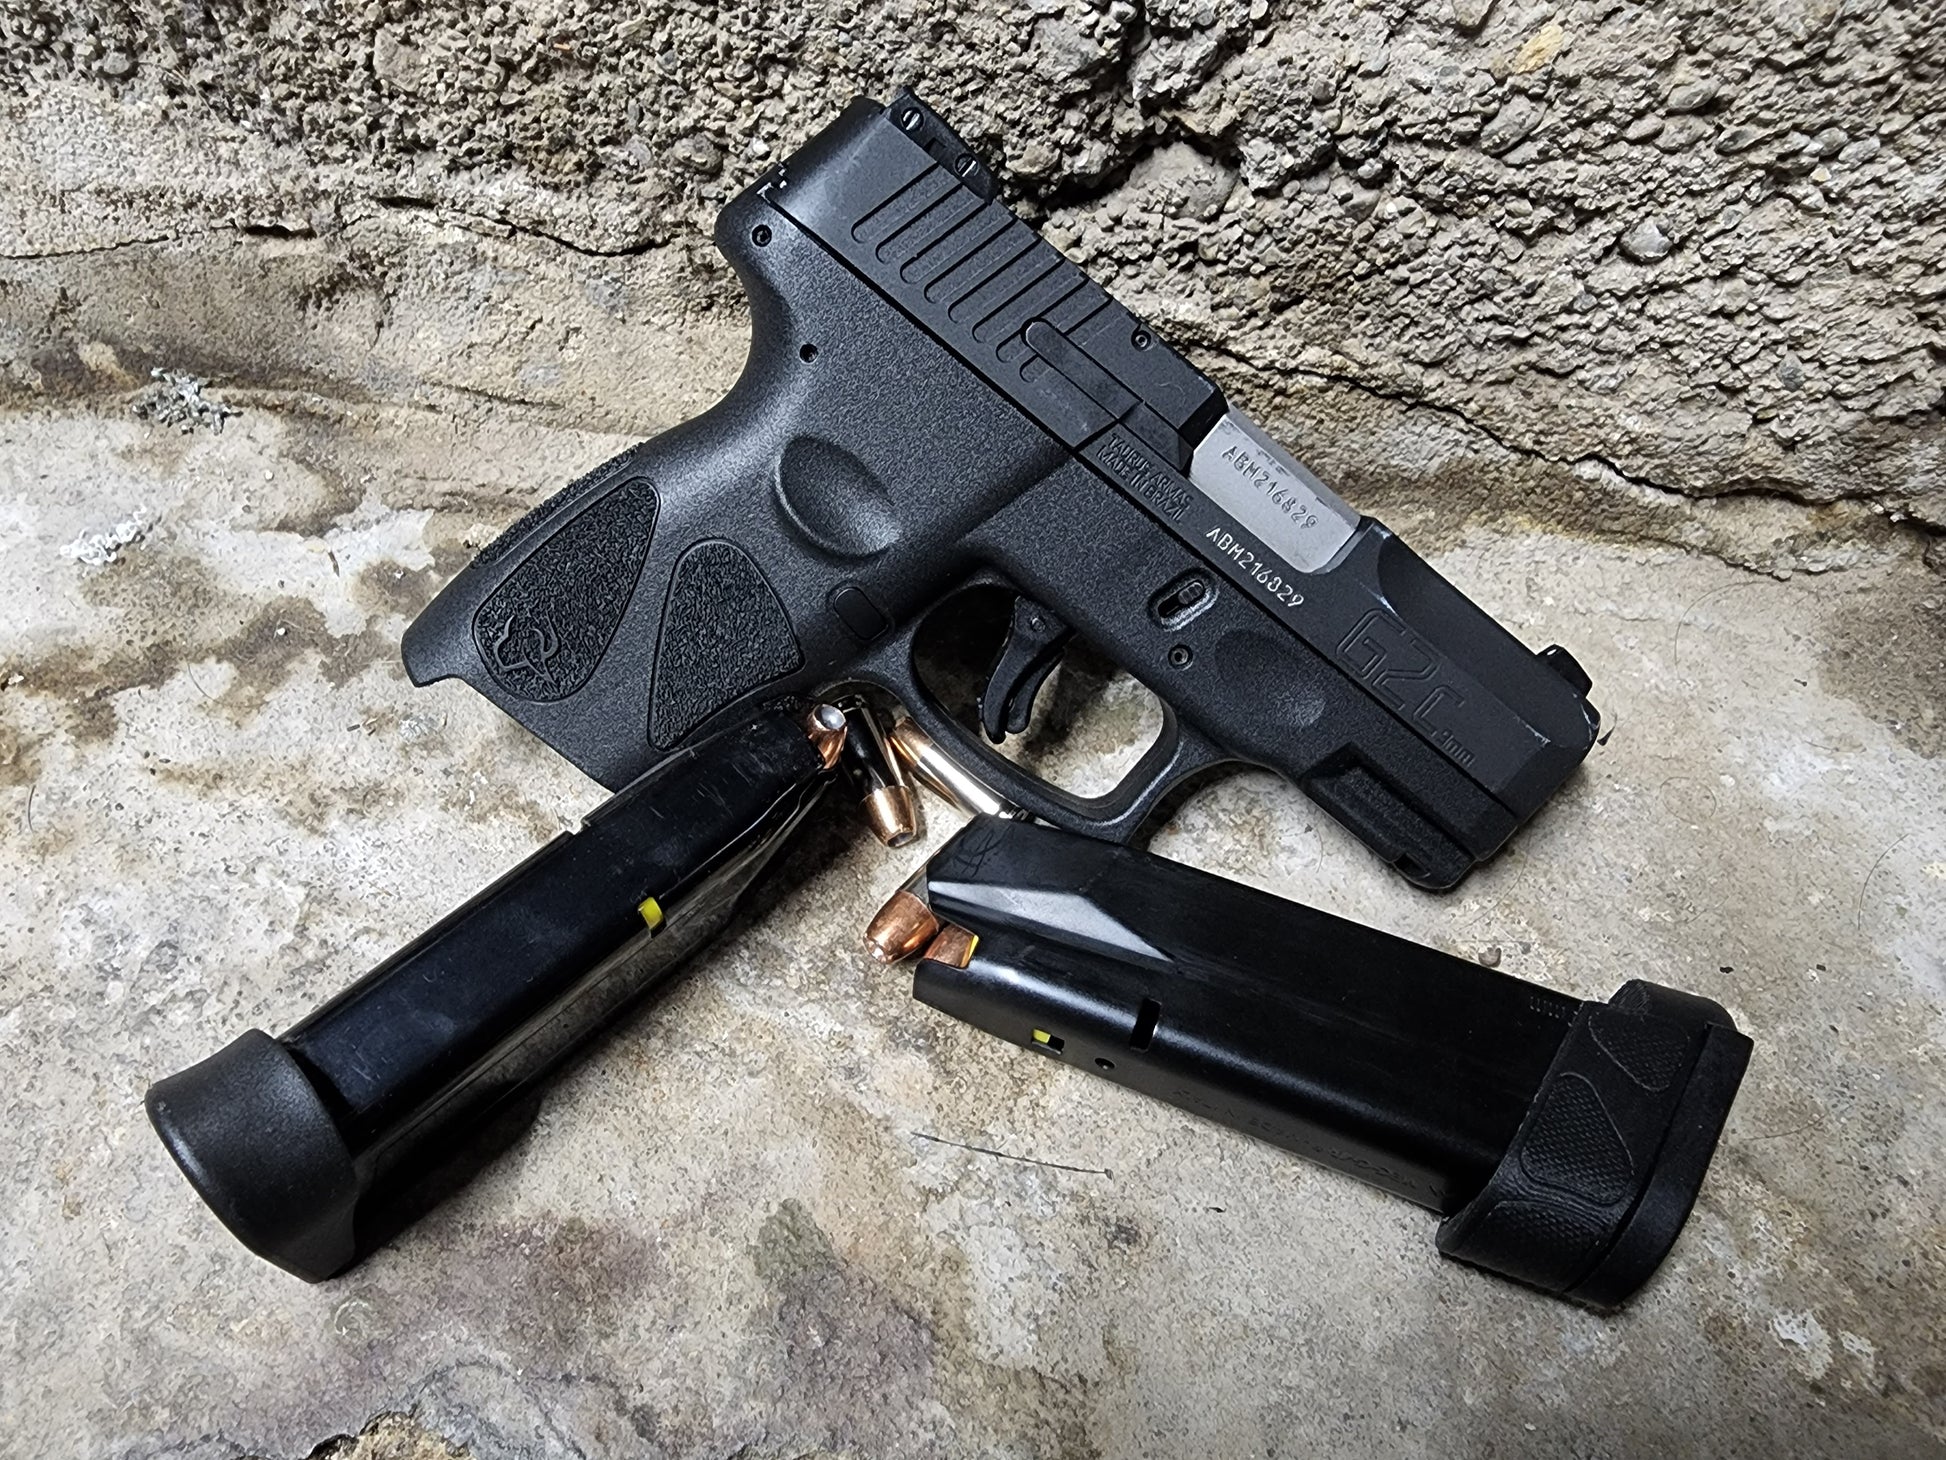 Get your extra capacity in your Taurus compact pistol with the adapter sleeve from WTT3D